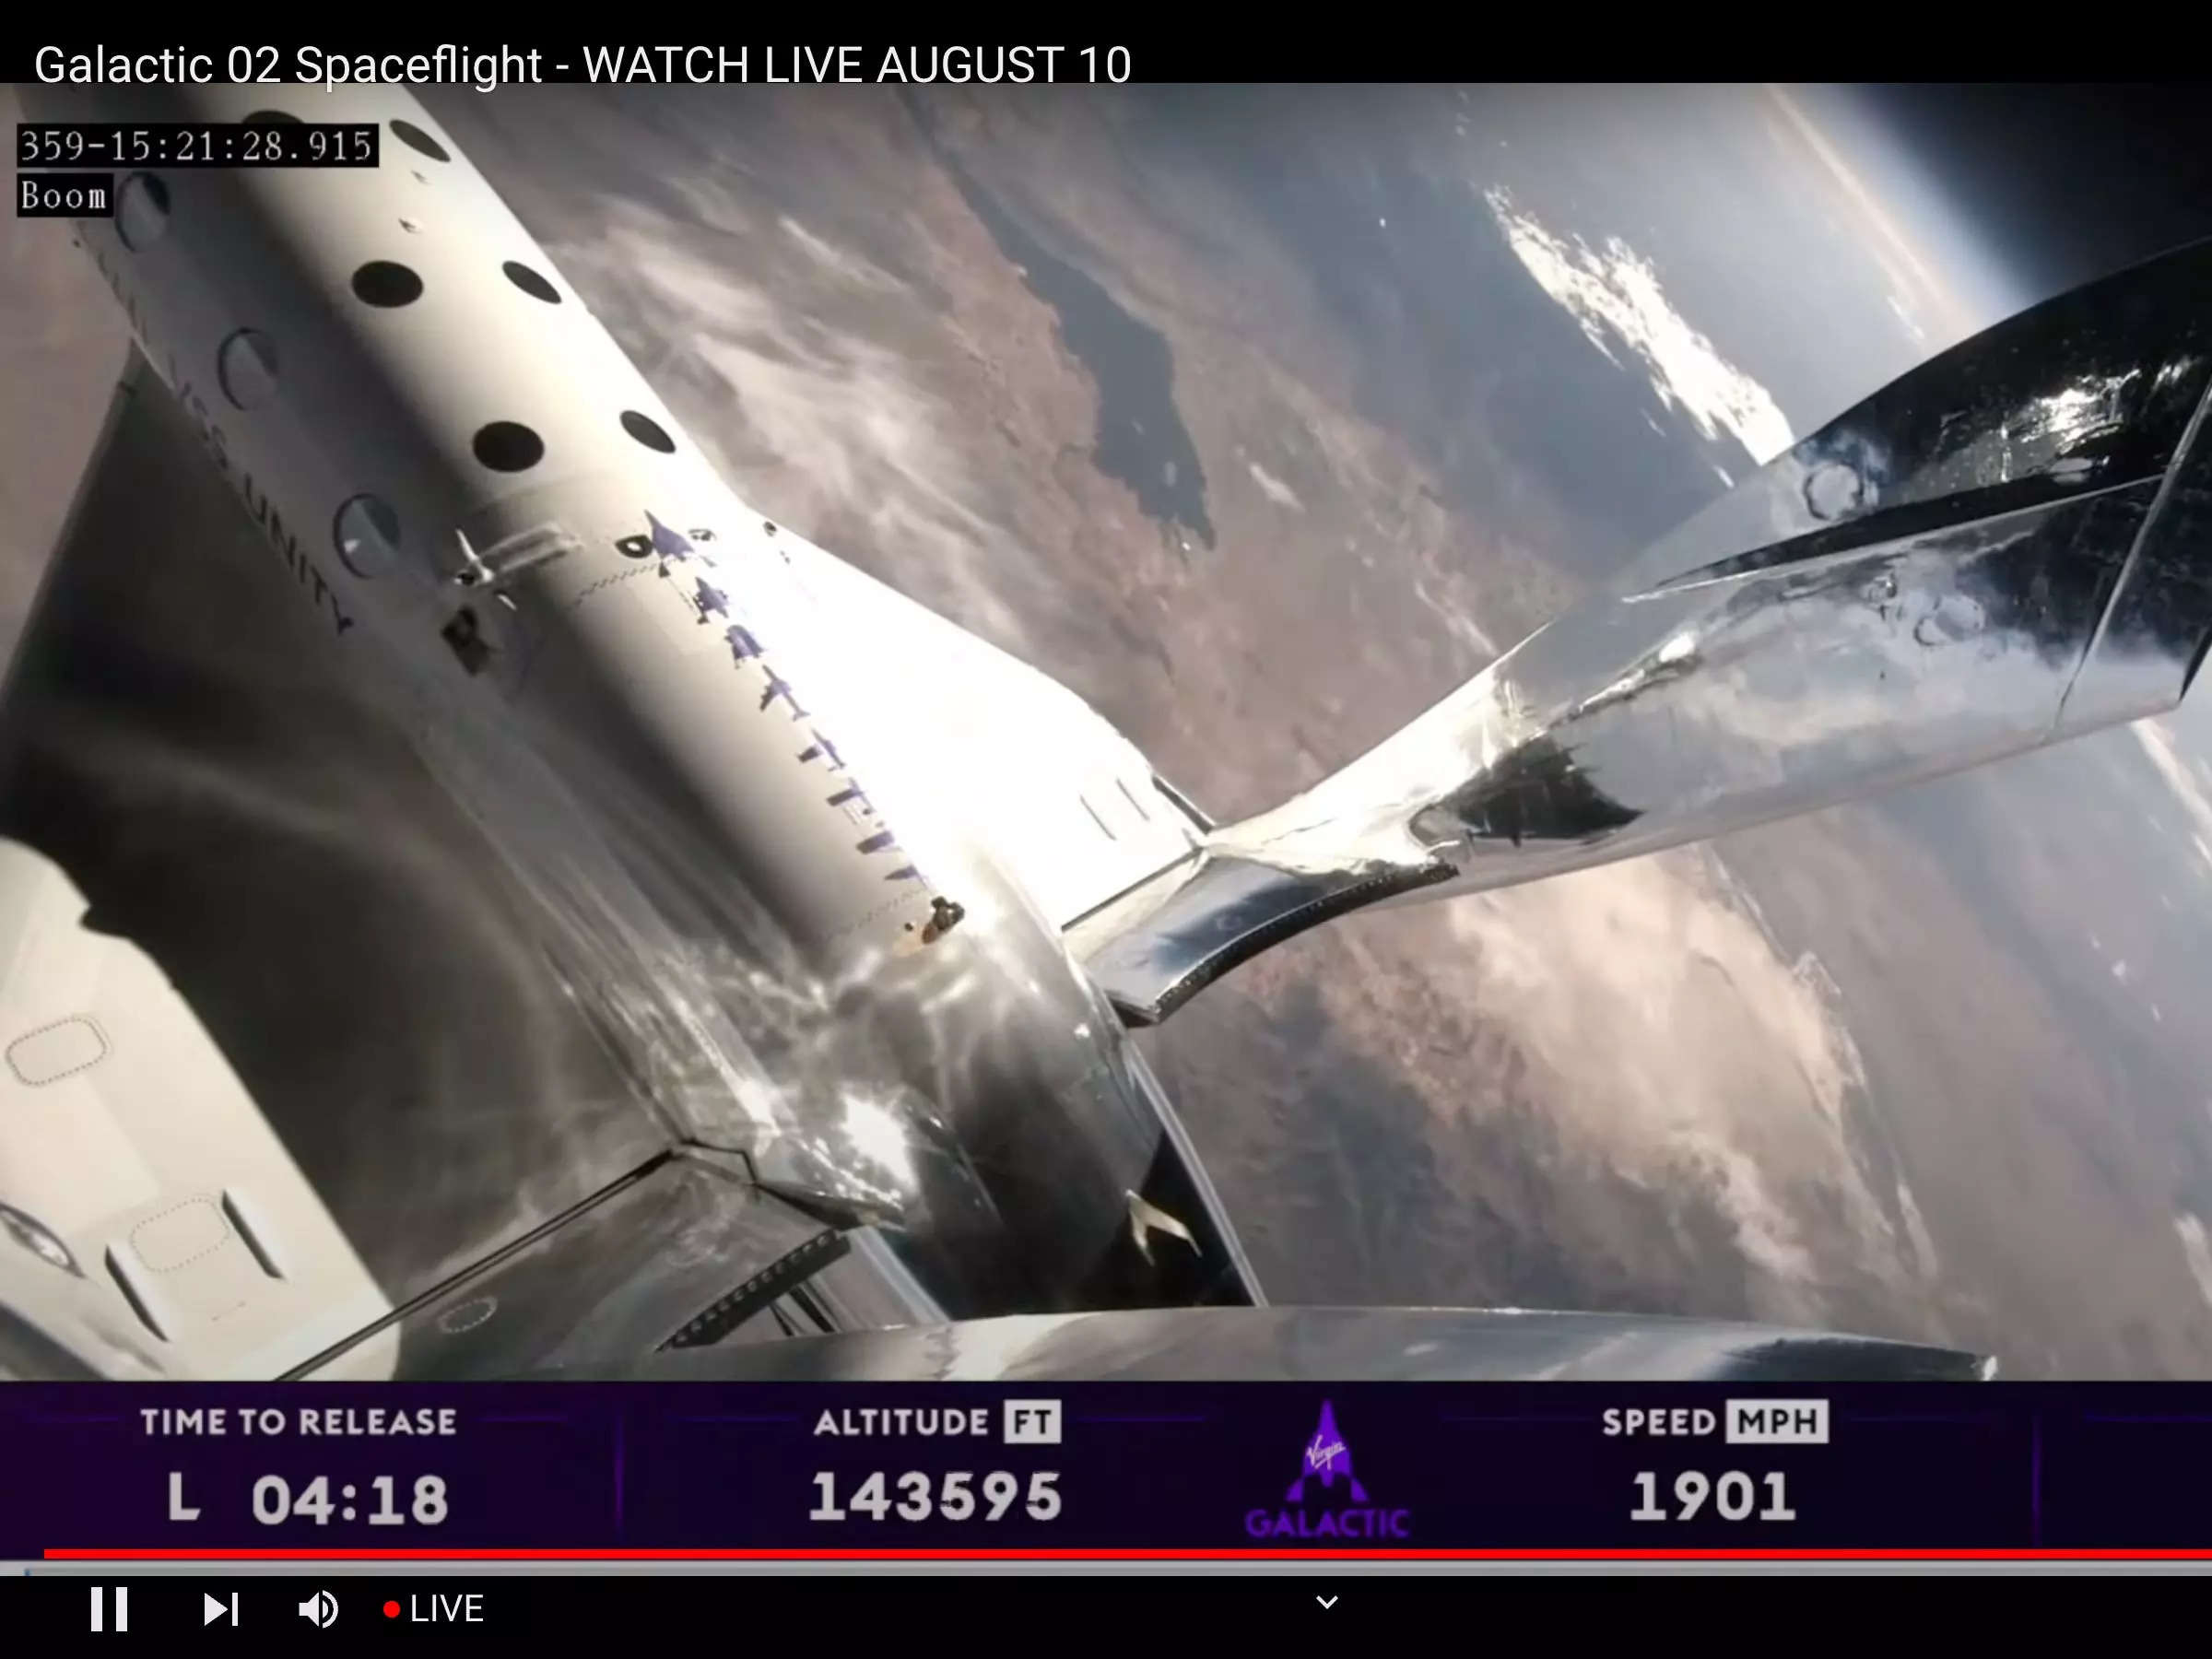 Virgin Galactic space ship at edge of space.